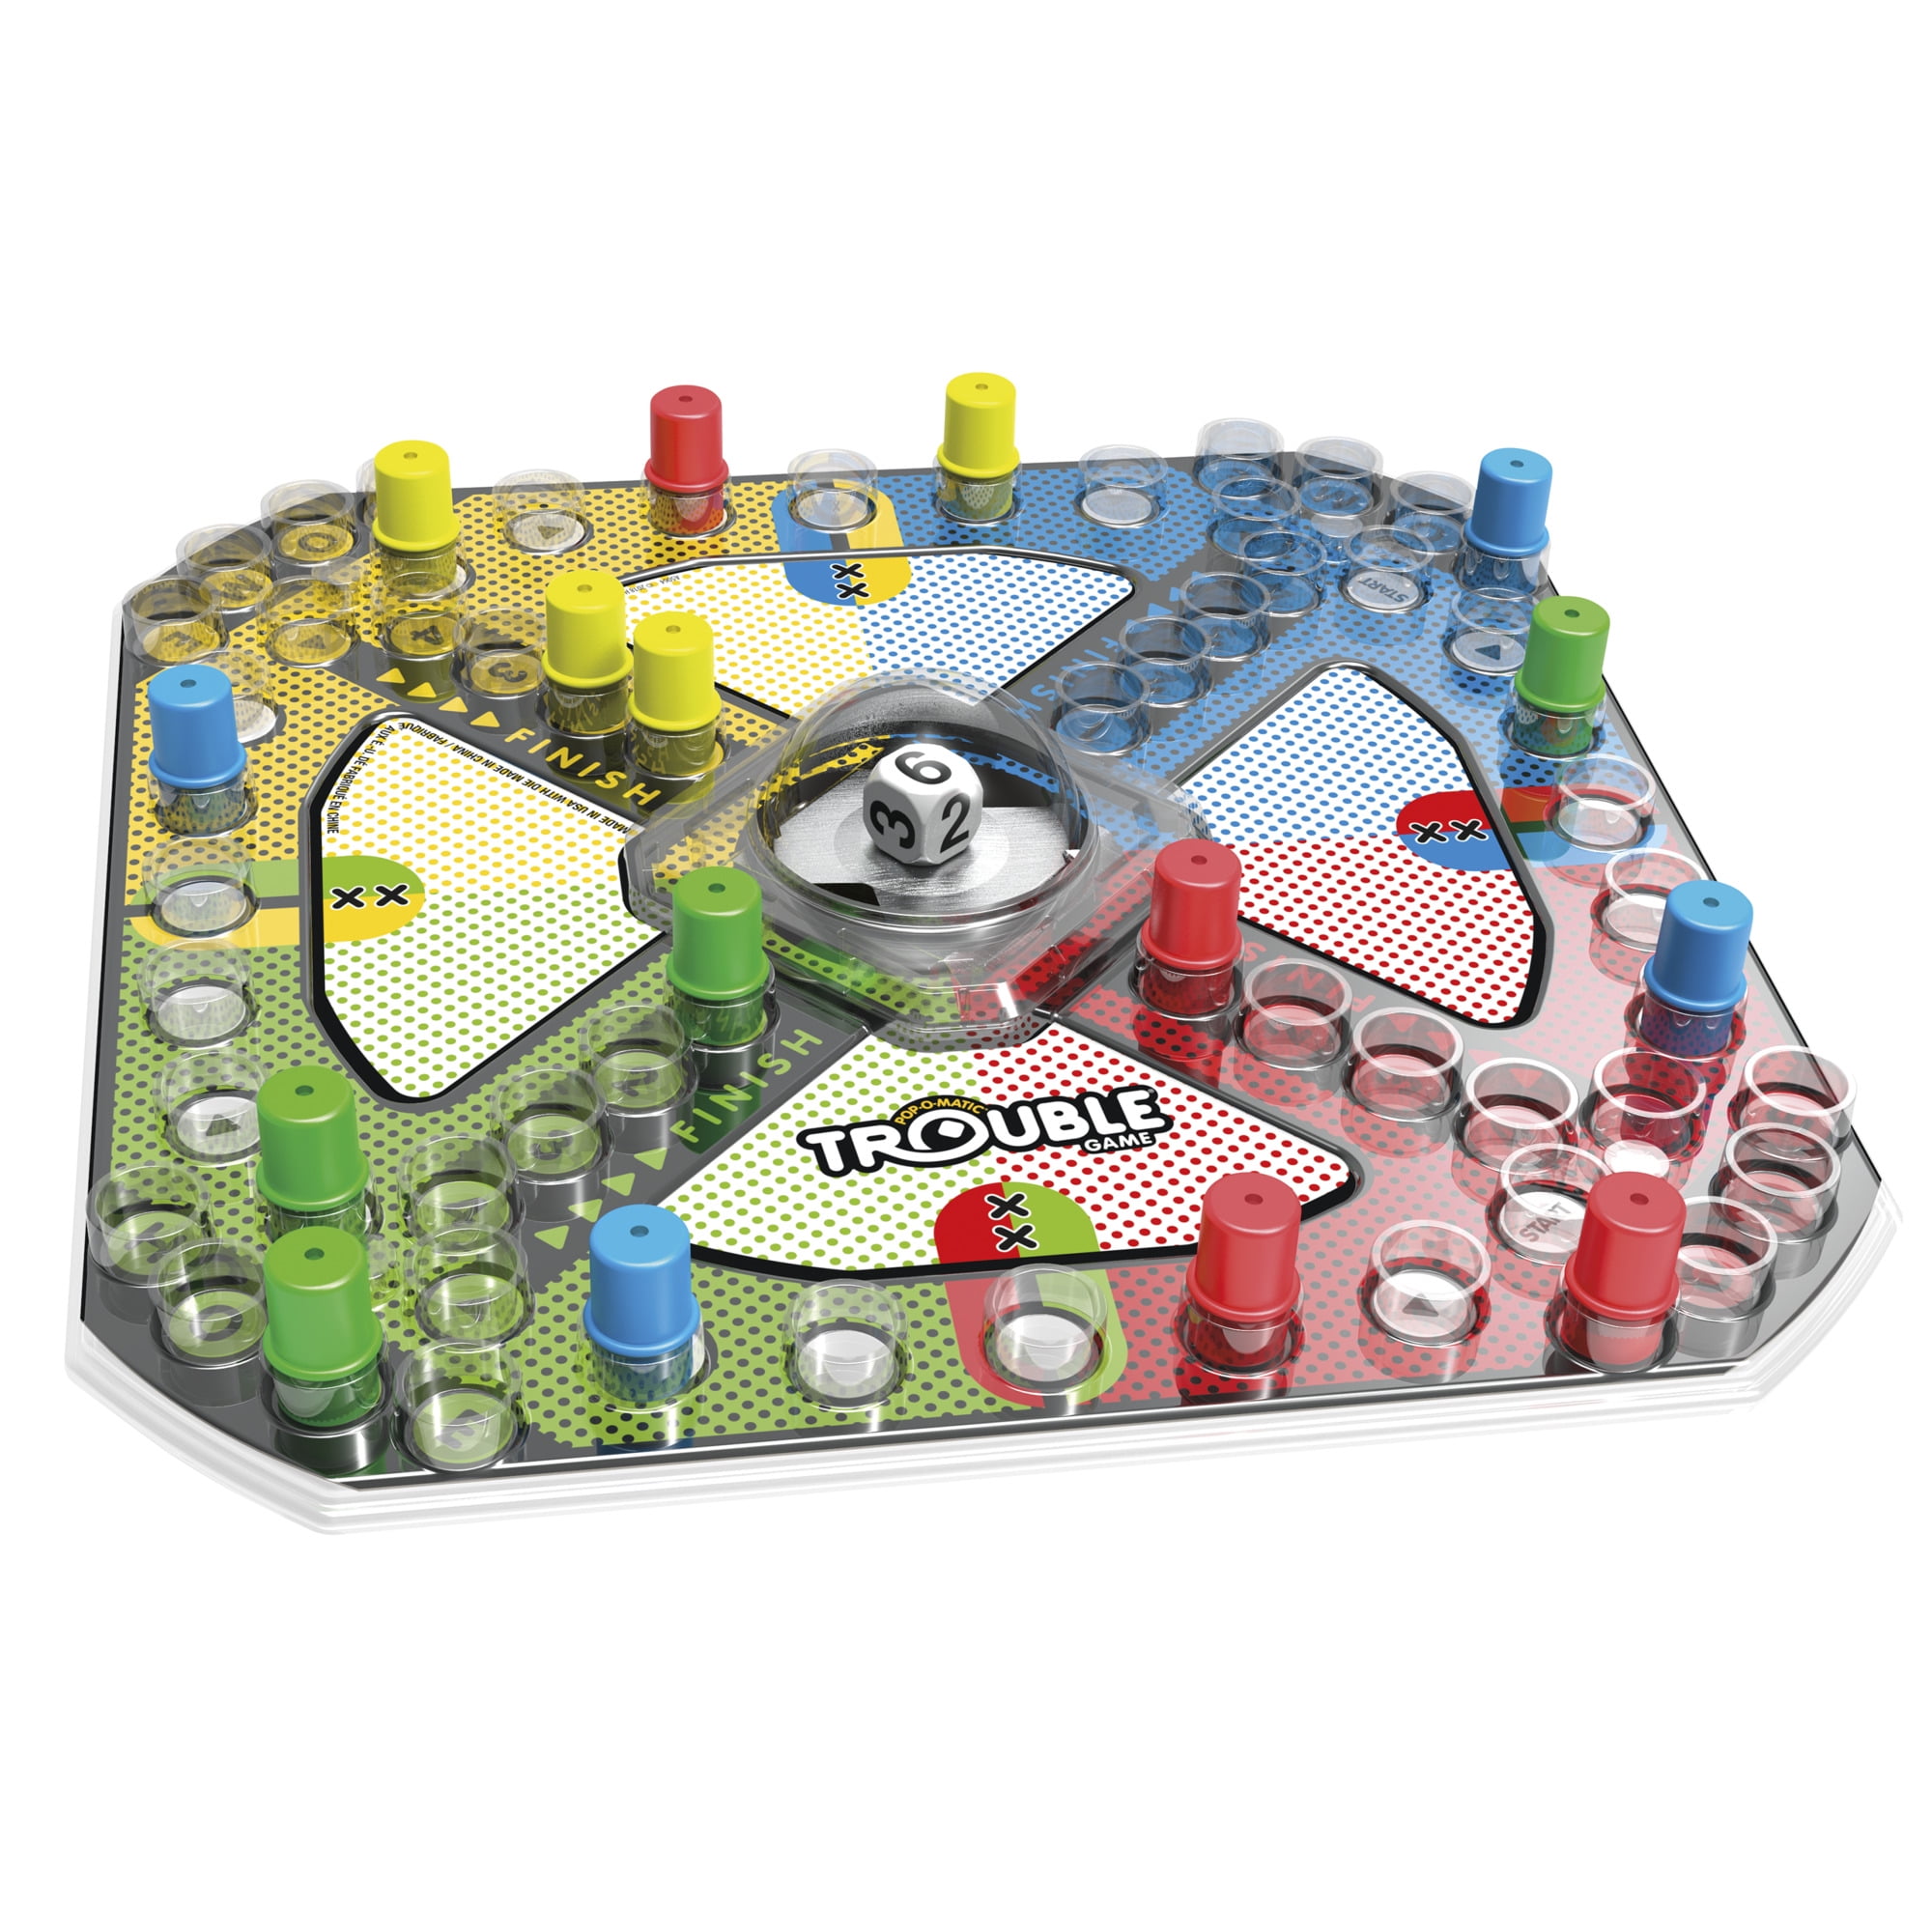 A5064 for sale online Hasbro Trouble Board Game 